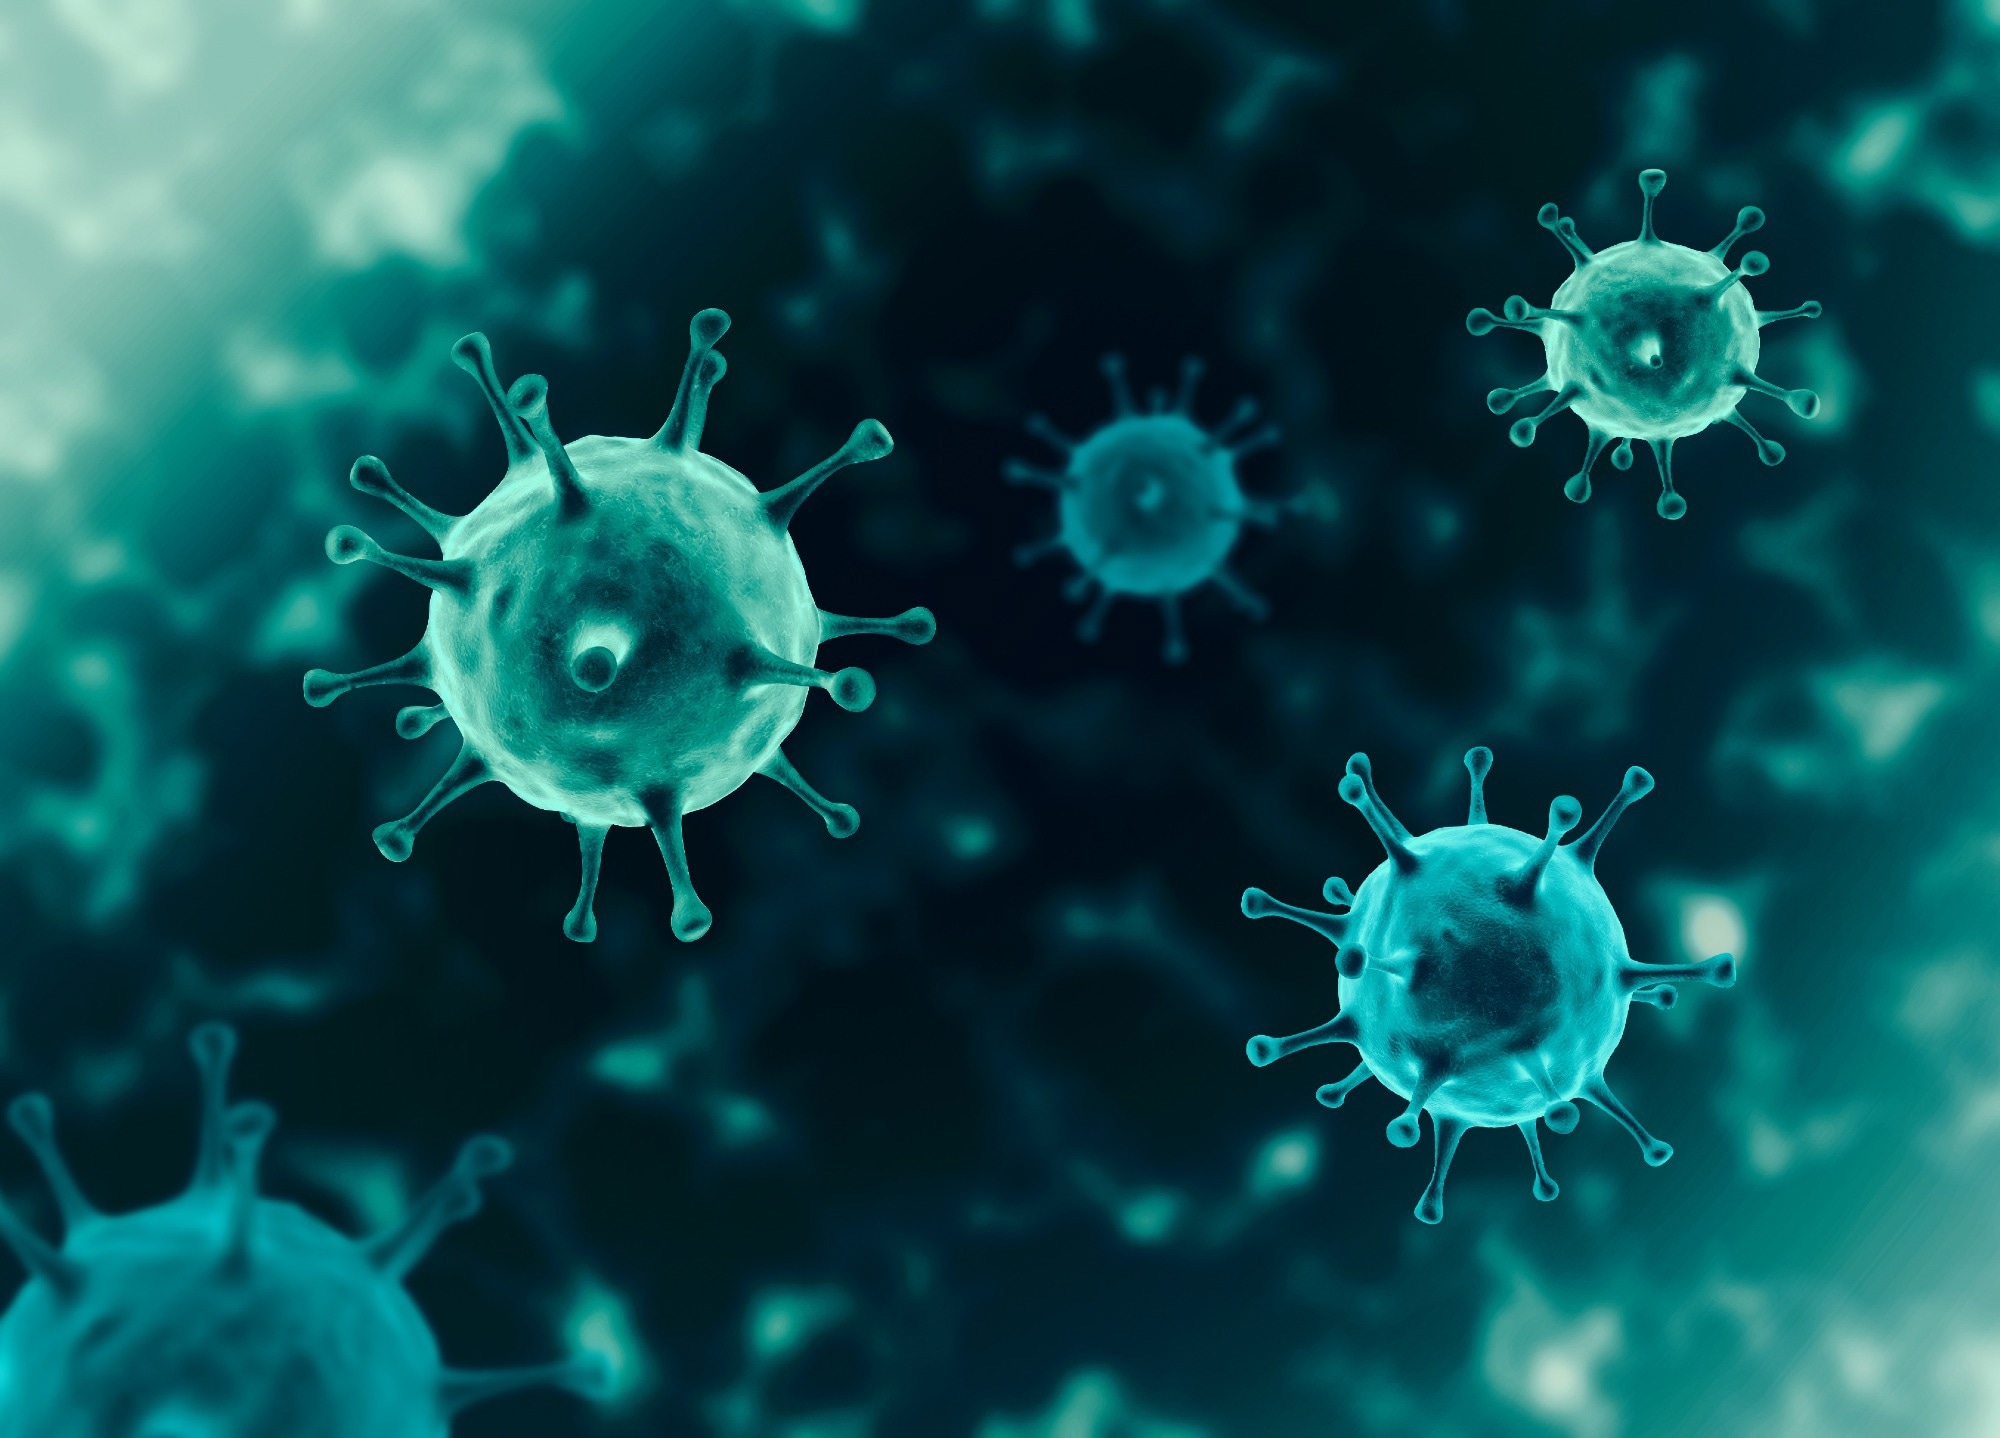 Study: COVID-19 mitigation behaviors and policies limited SARS-CoV-2 transmission in the United States from September 2020 through November 2021. Image Credit: Nhemz/Shutterstock.com